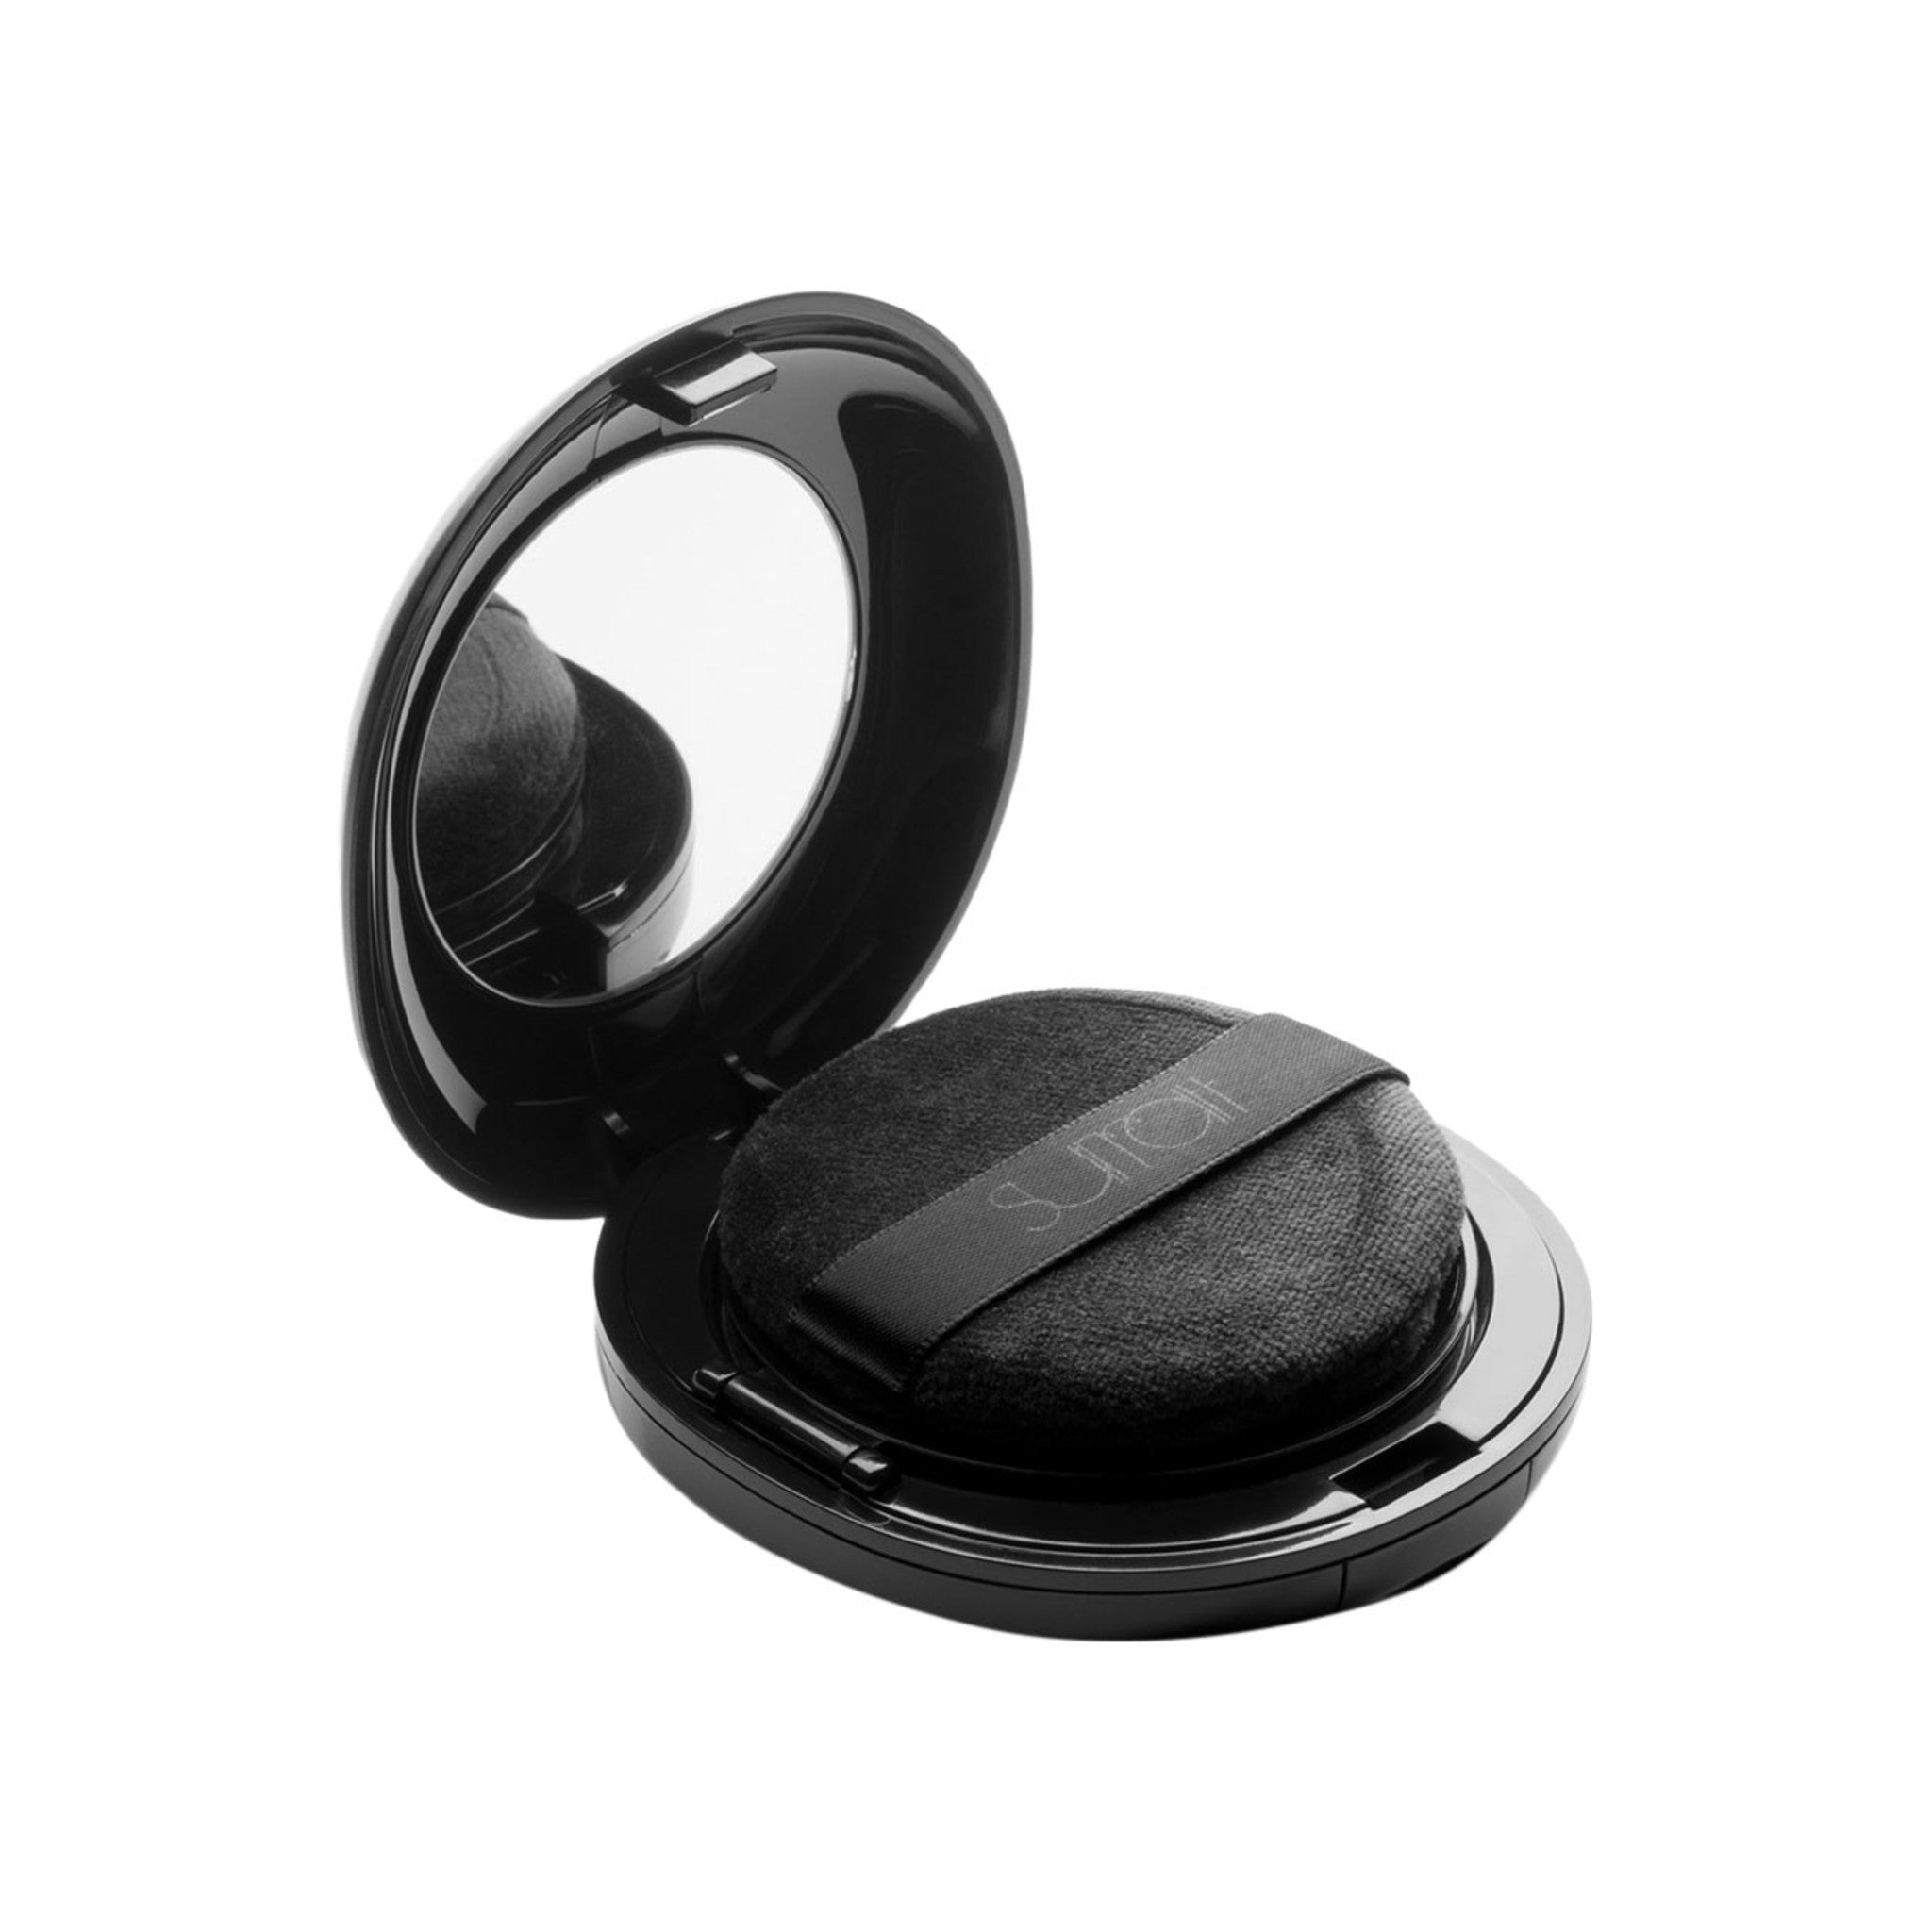 Surratt Diaphane Loose Powder Compact and Refill Size variant: Matte main image.